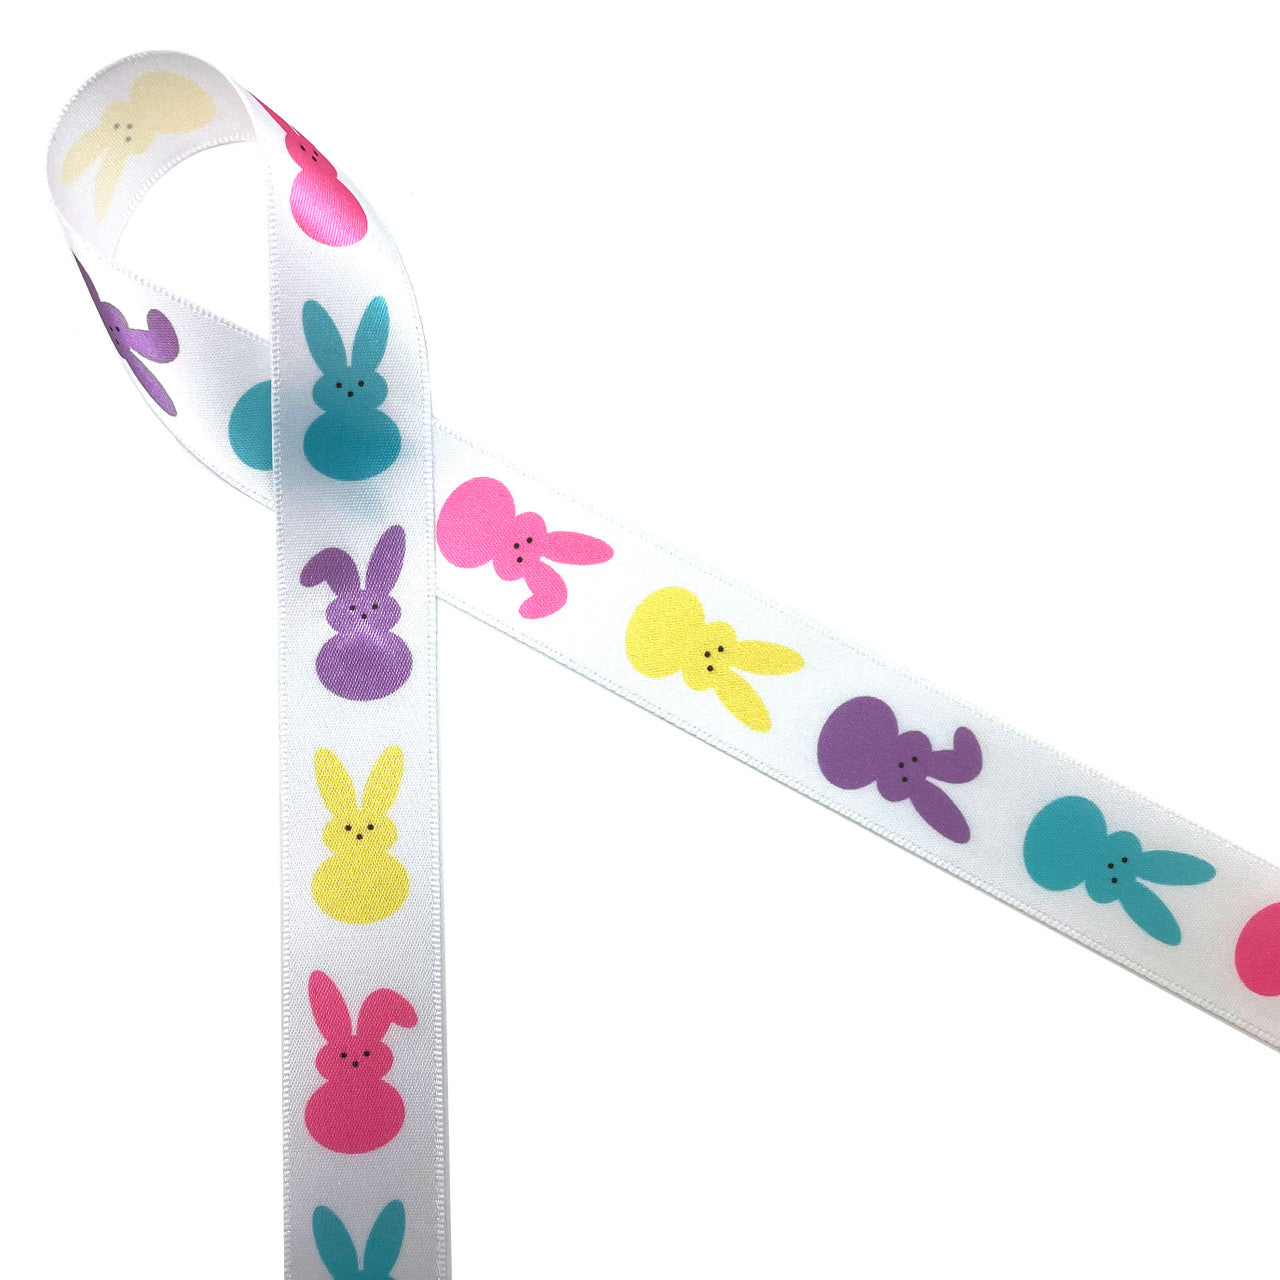 Easter bunny peeps in lavender, pink, yellow and blue printed on 1.5 white  single face satin, 10 yards